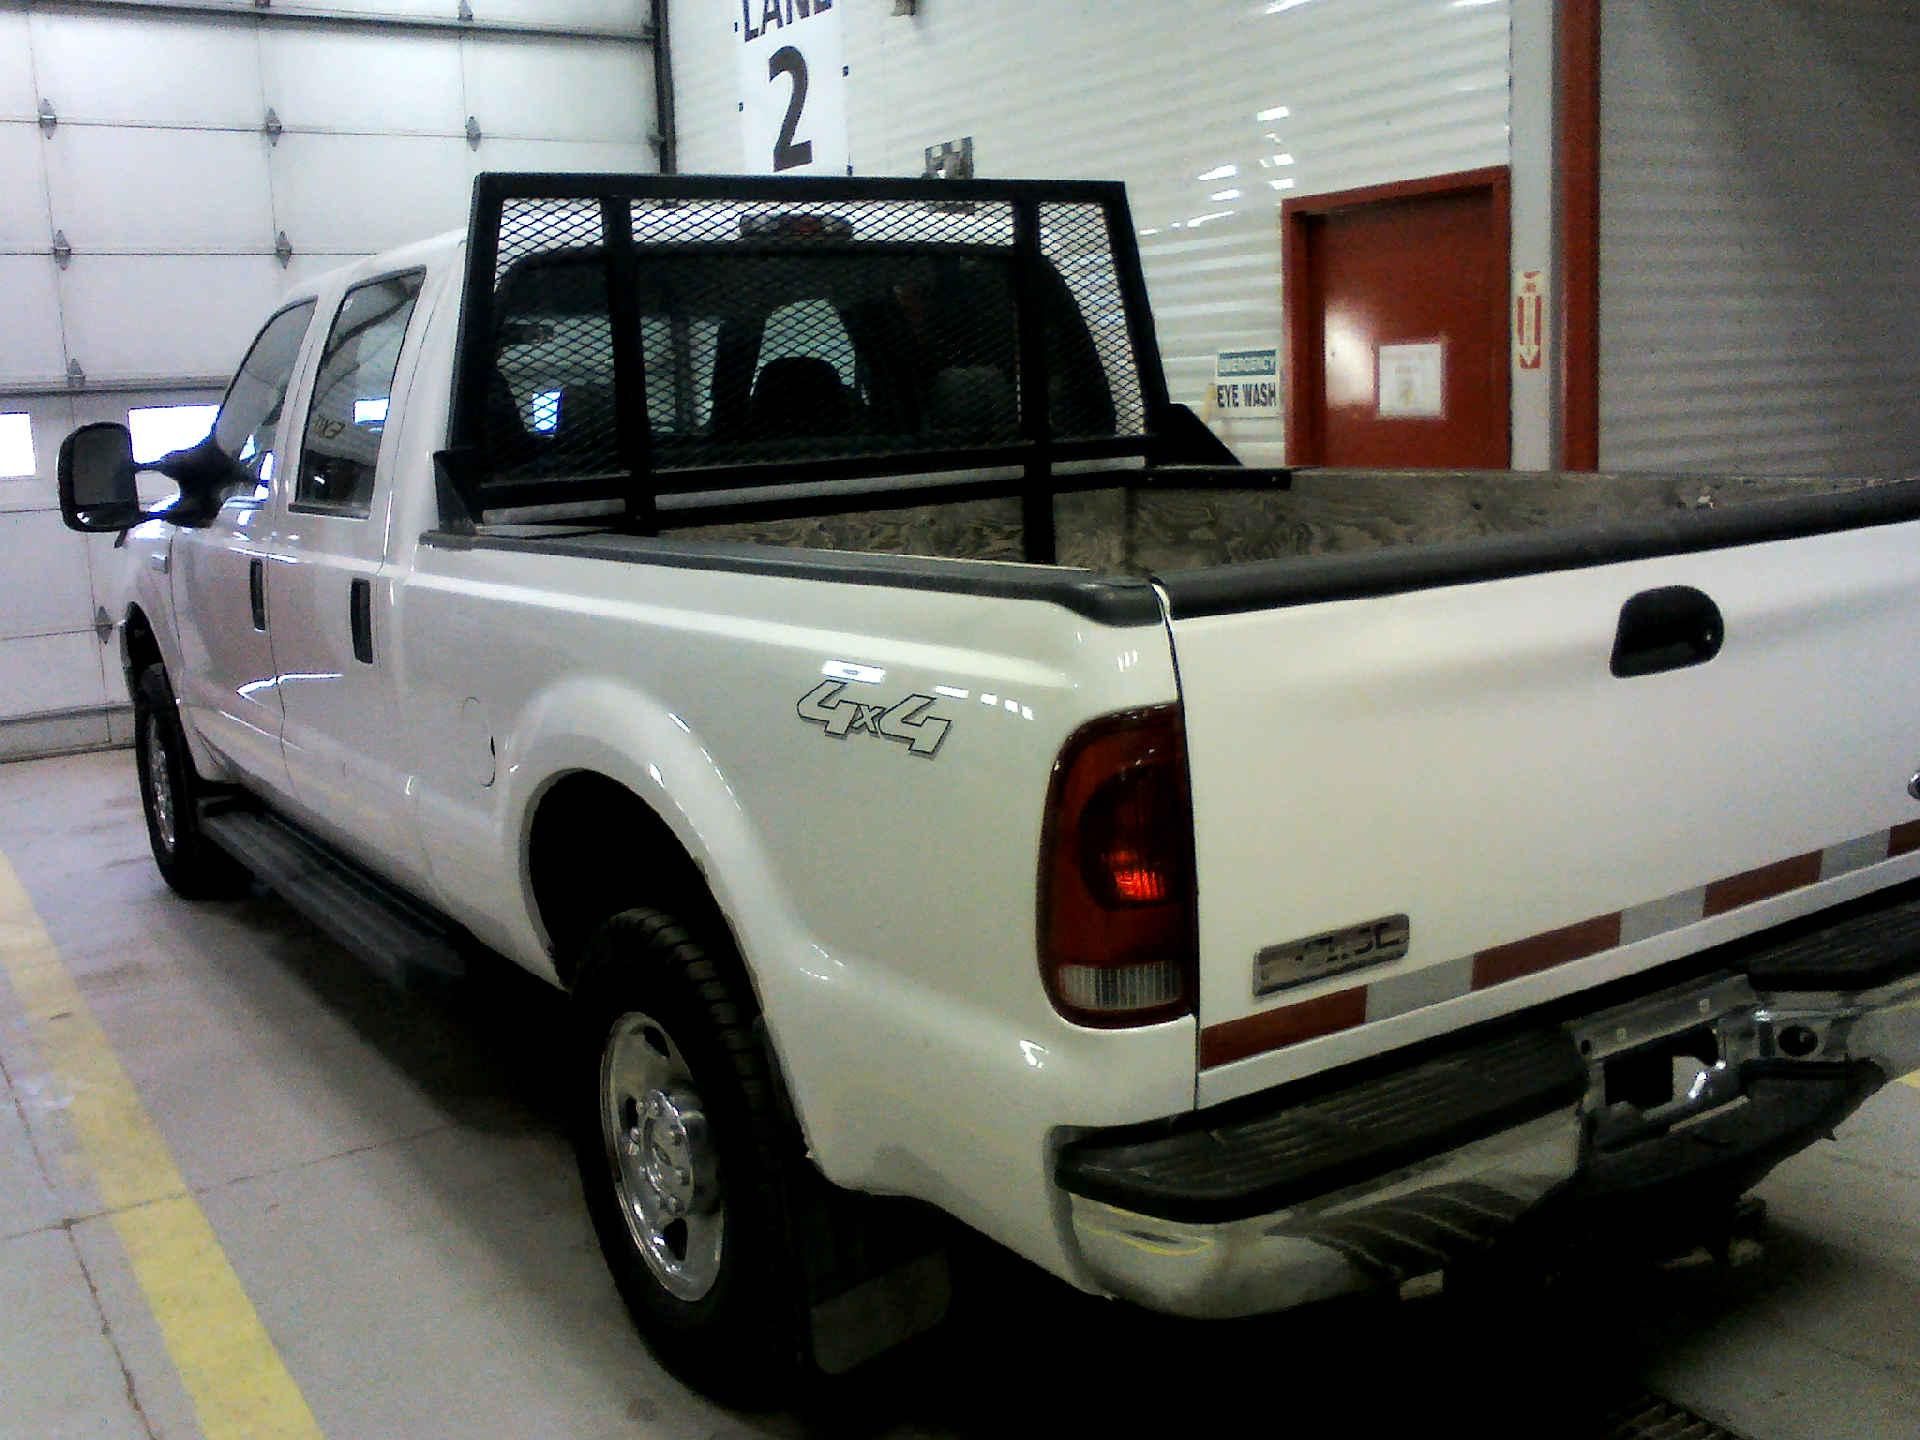 2006 FORD F-250 SD XLT CREW CAB 4WD 5.4L V8 SOHC 16V AUTOMATIC SN:1FTSW21556ED34193 OPTIONS:AC TW CC - Image 2 of 10